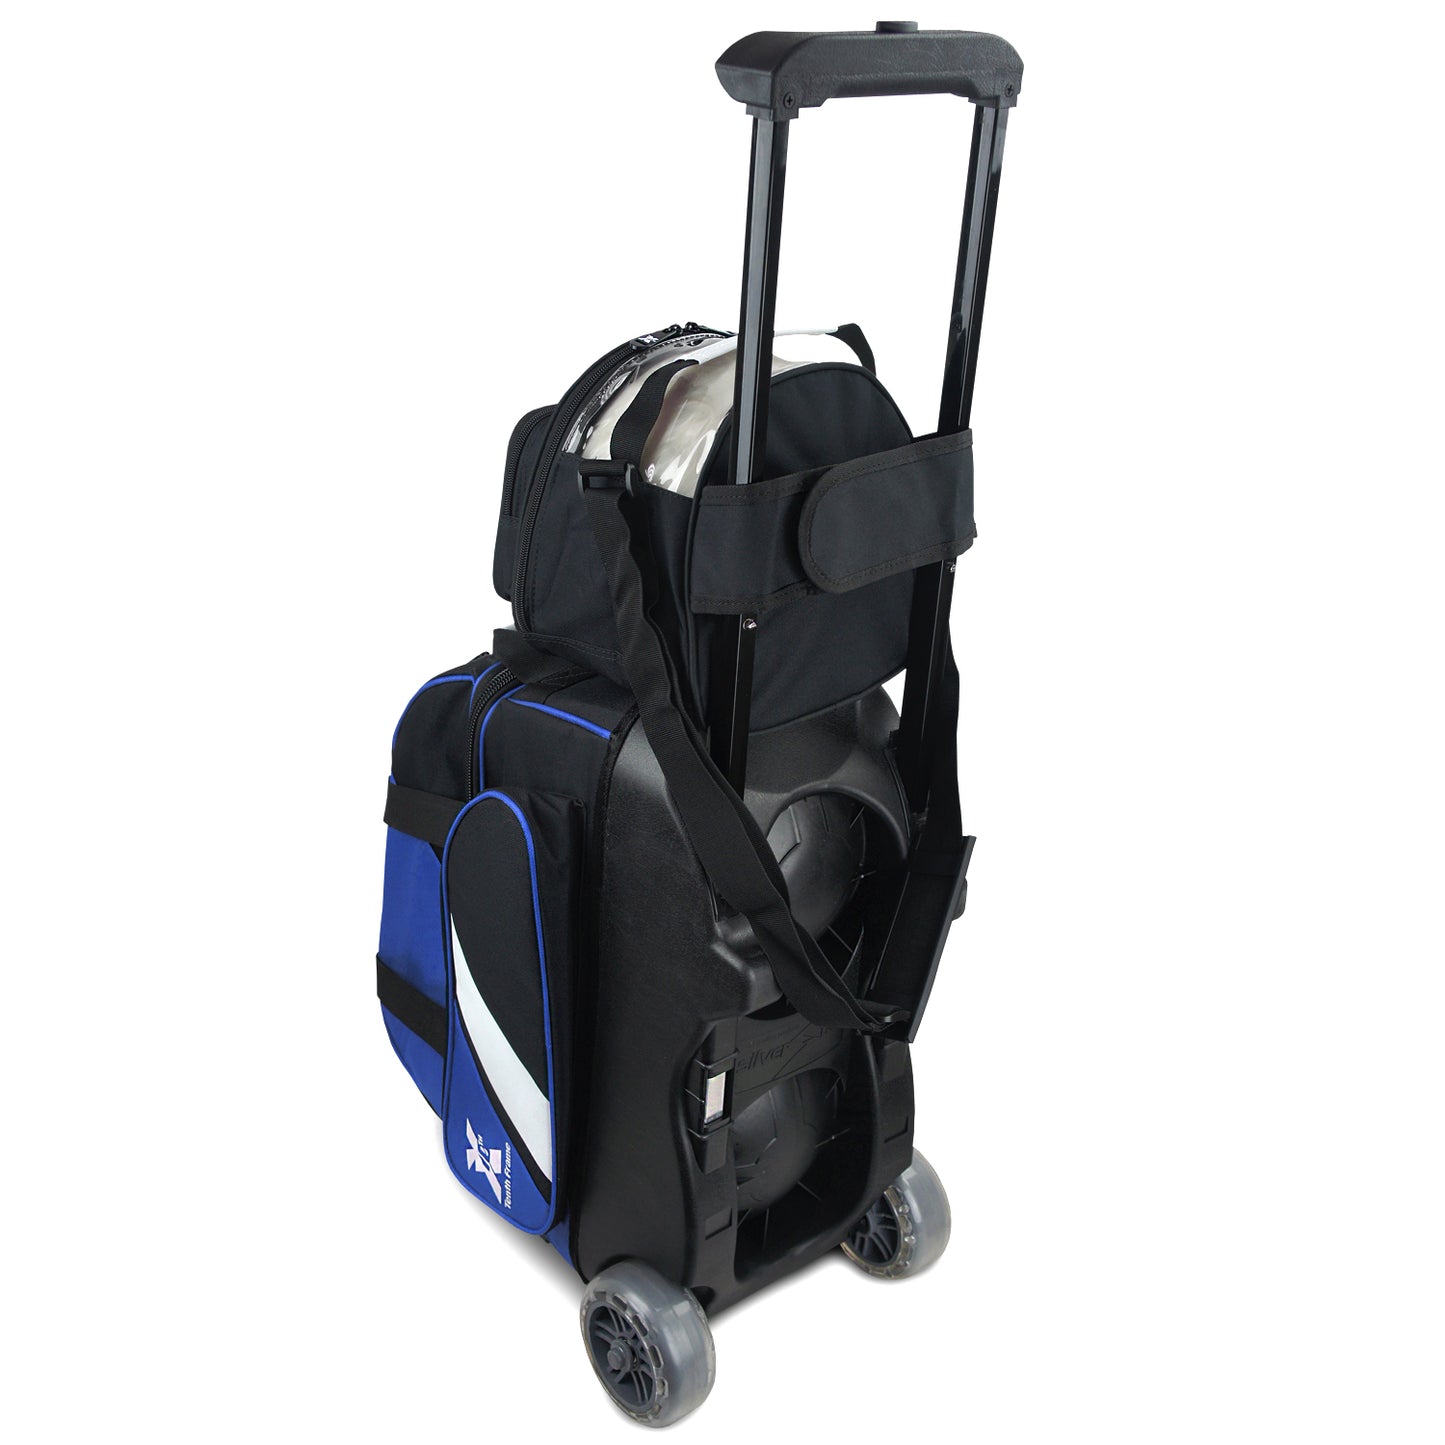 Tenth Frame Deluxe Double Bundle - 2 Ball Roller with a 1 Ball Add-On Bowling Bag (Blue - Back)